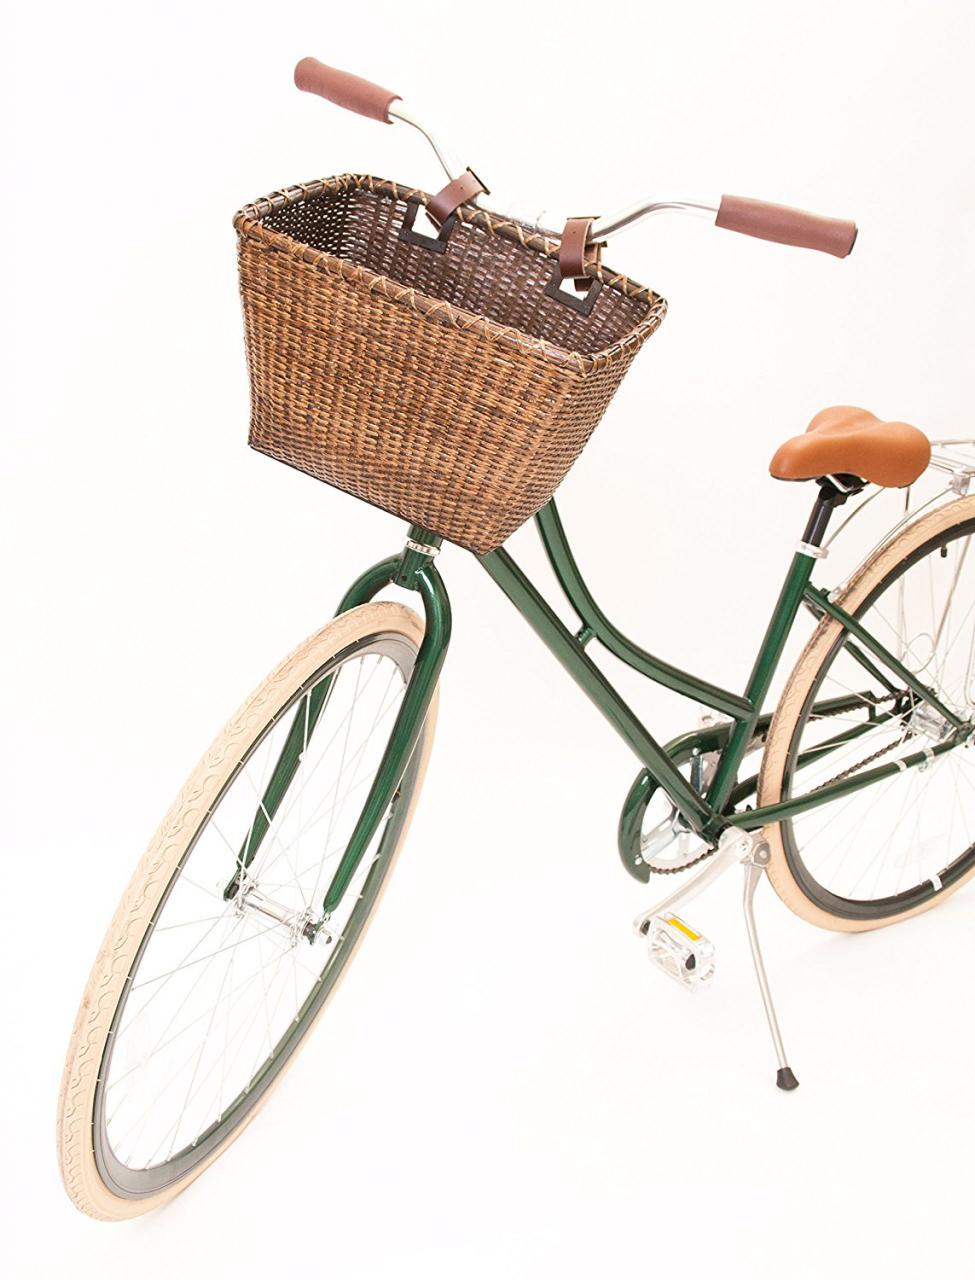 12 Eye-Catching Bike Baskets for the Ultimate Beach Ride